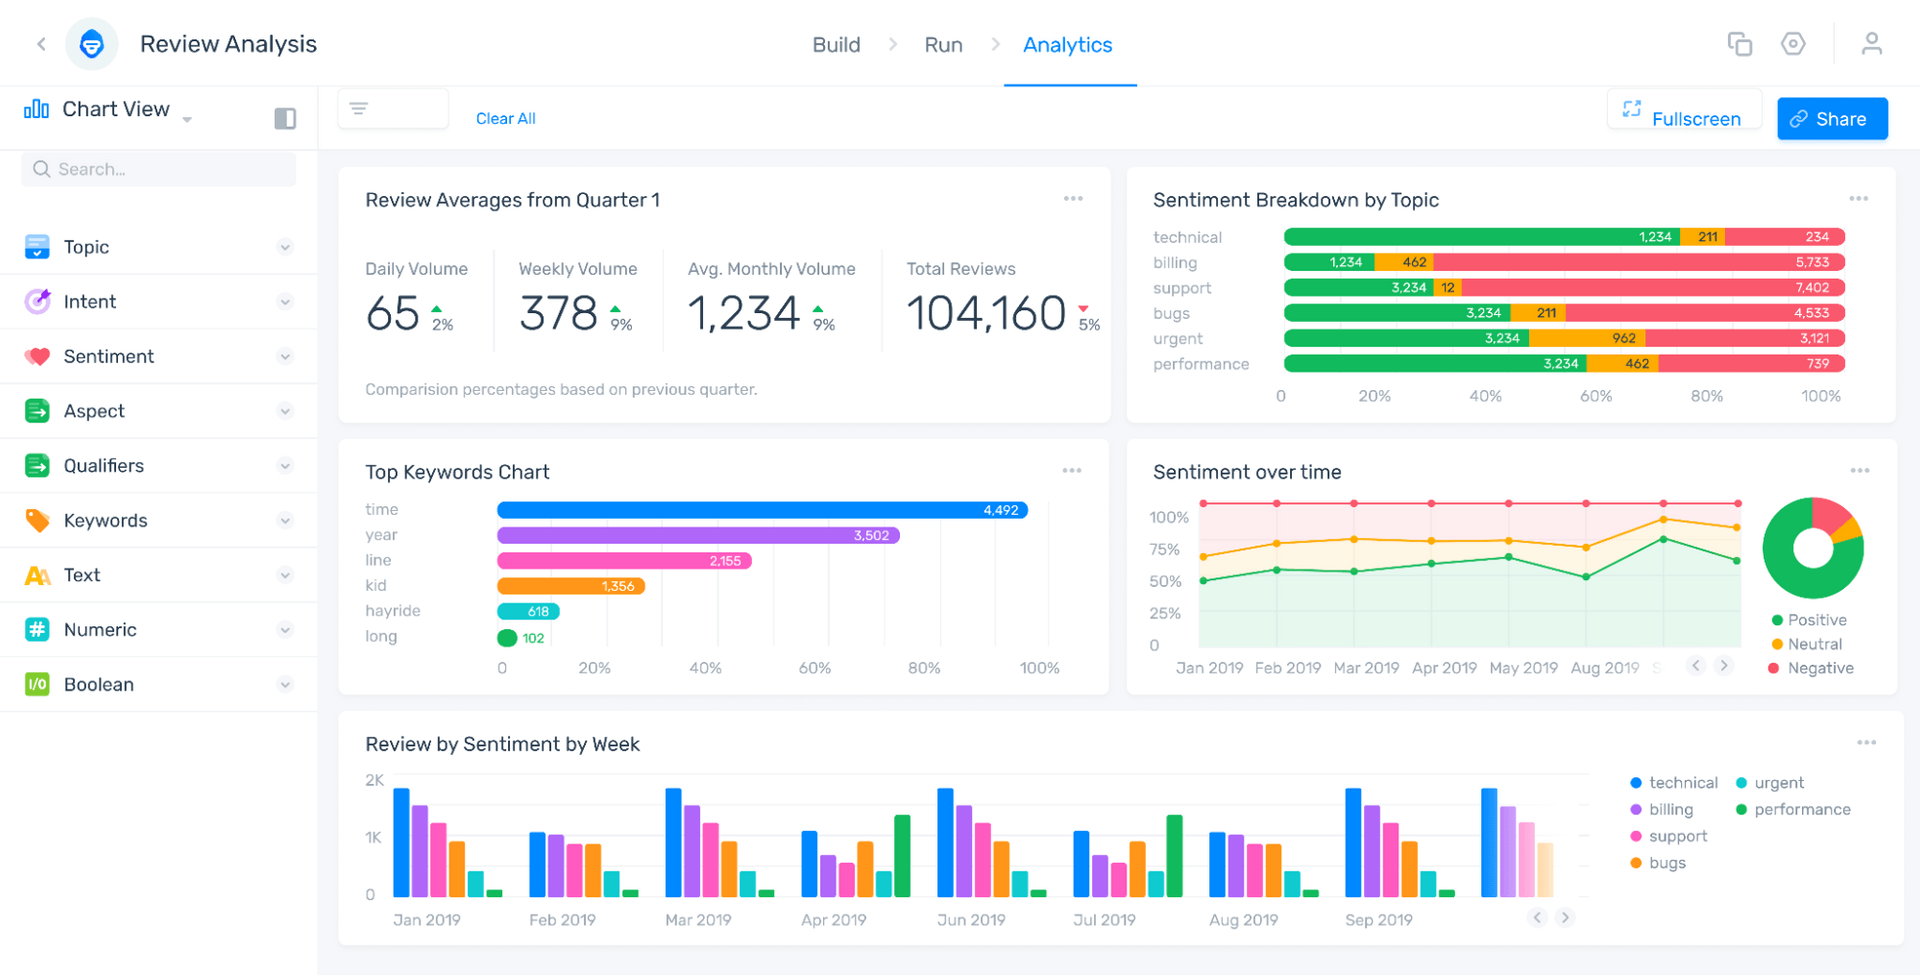 Review analysis dashboard including keyword chart, sentiment by week, sentiment breakdown by topic, sentiment over time.